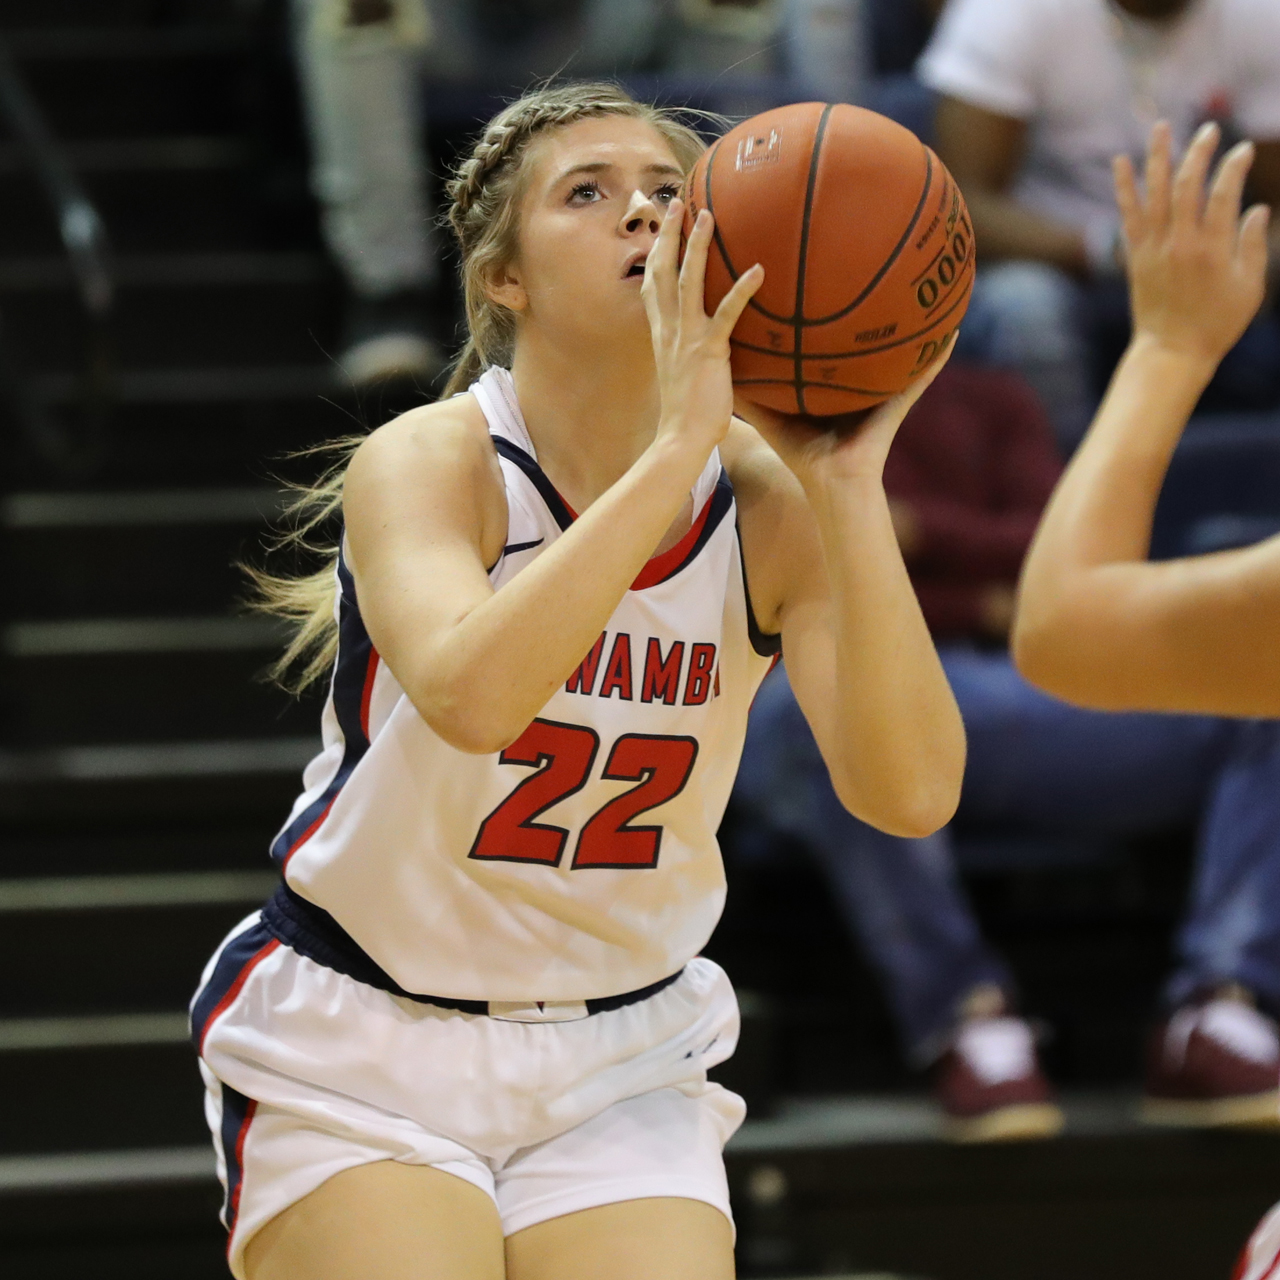 Lady Indians suffer 73-62 loss at Gadsden State